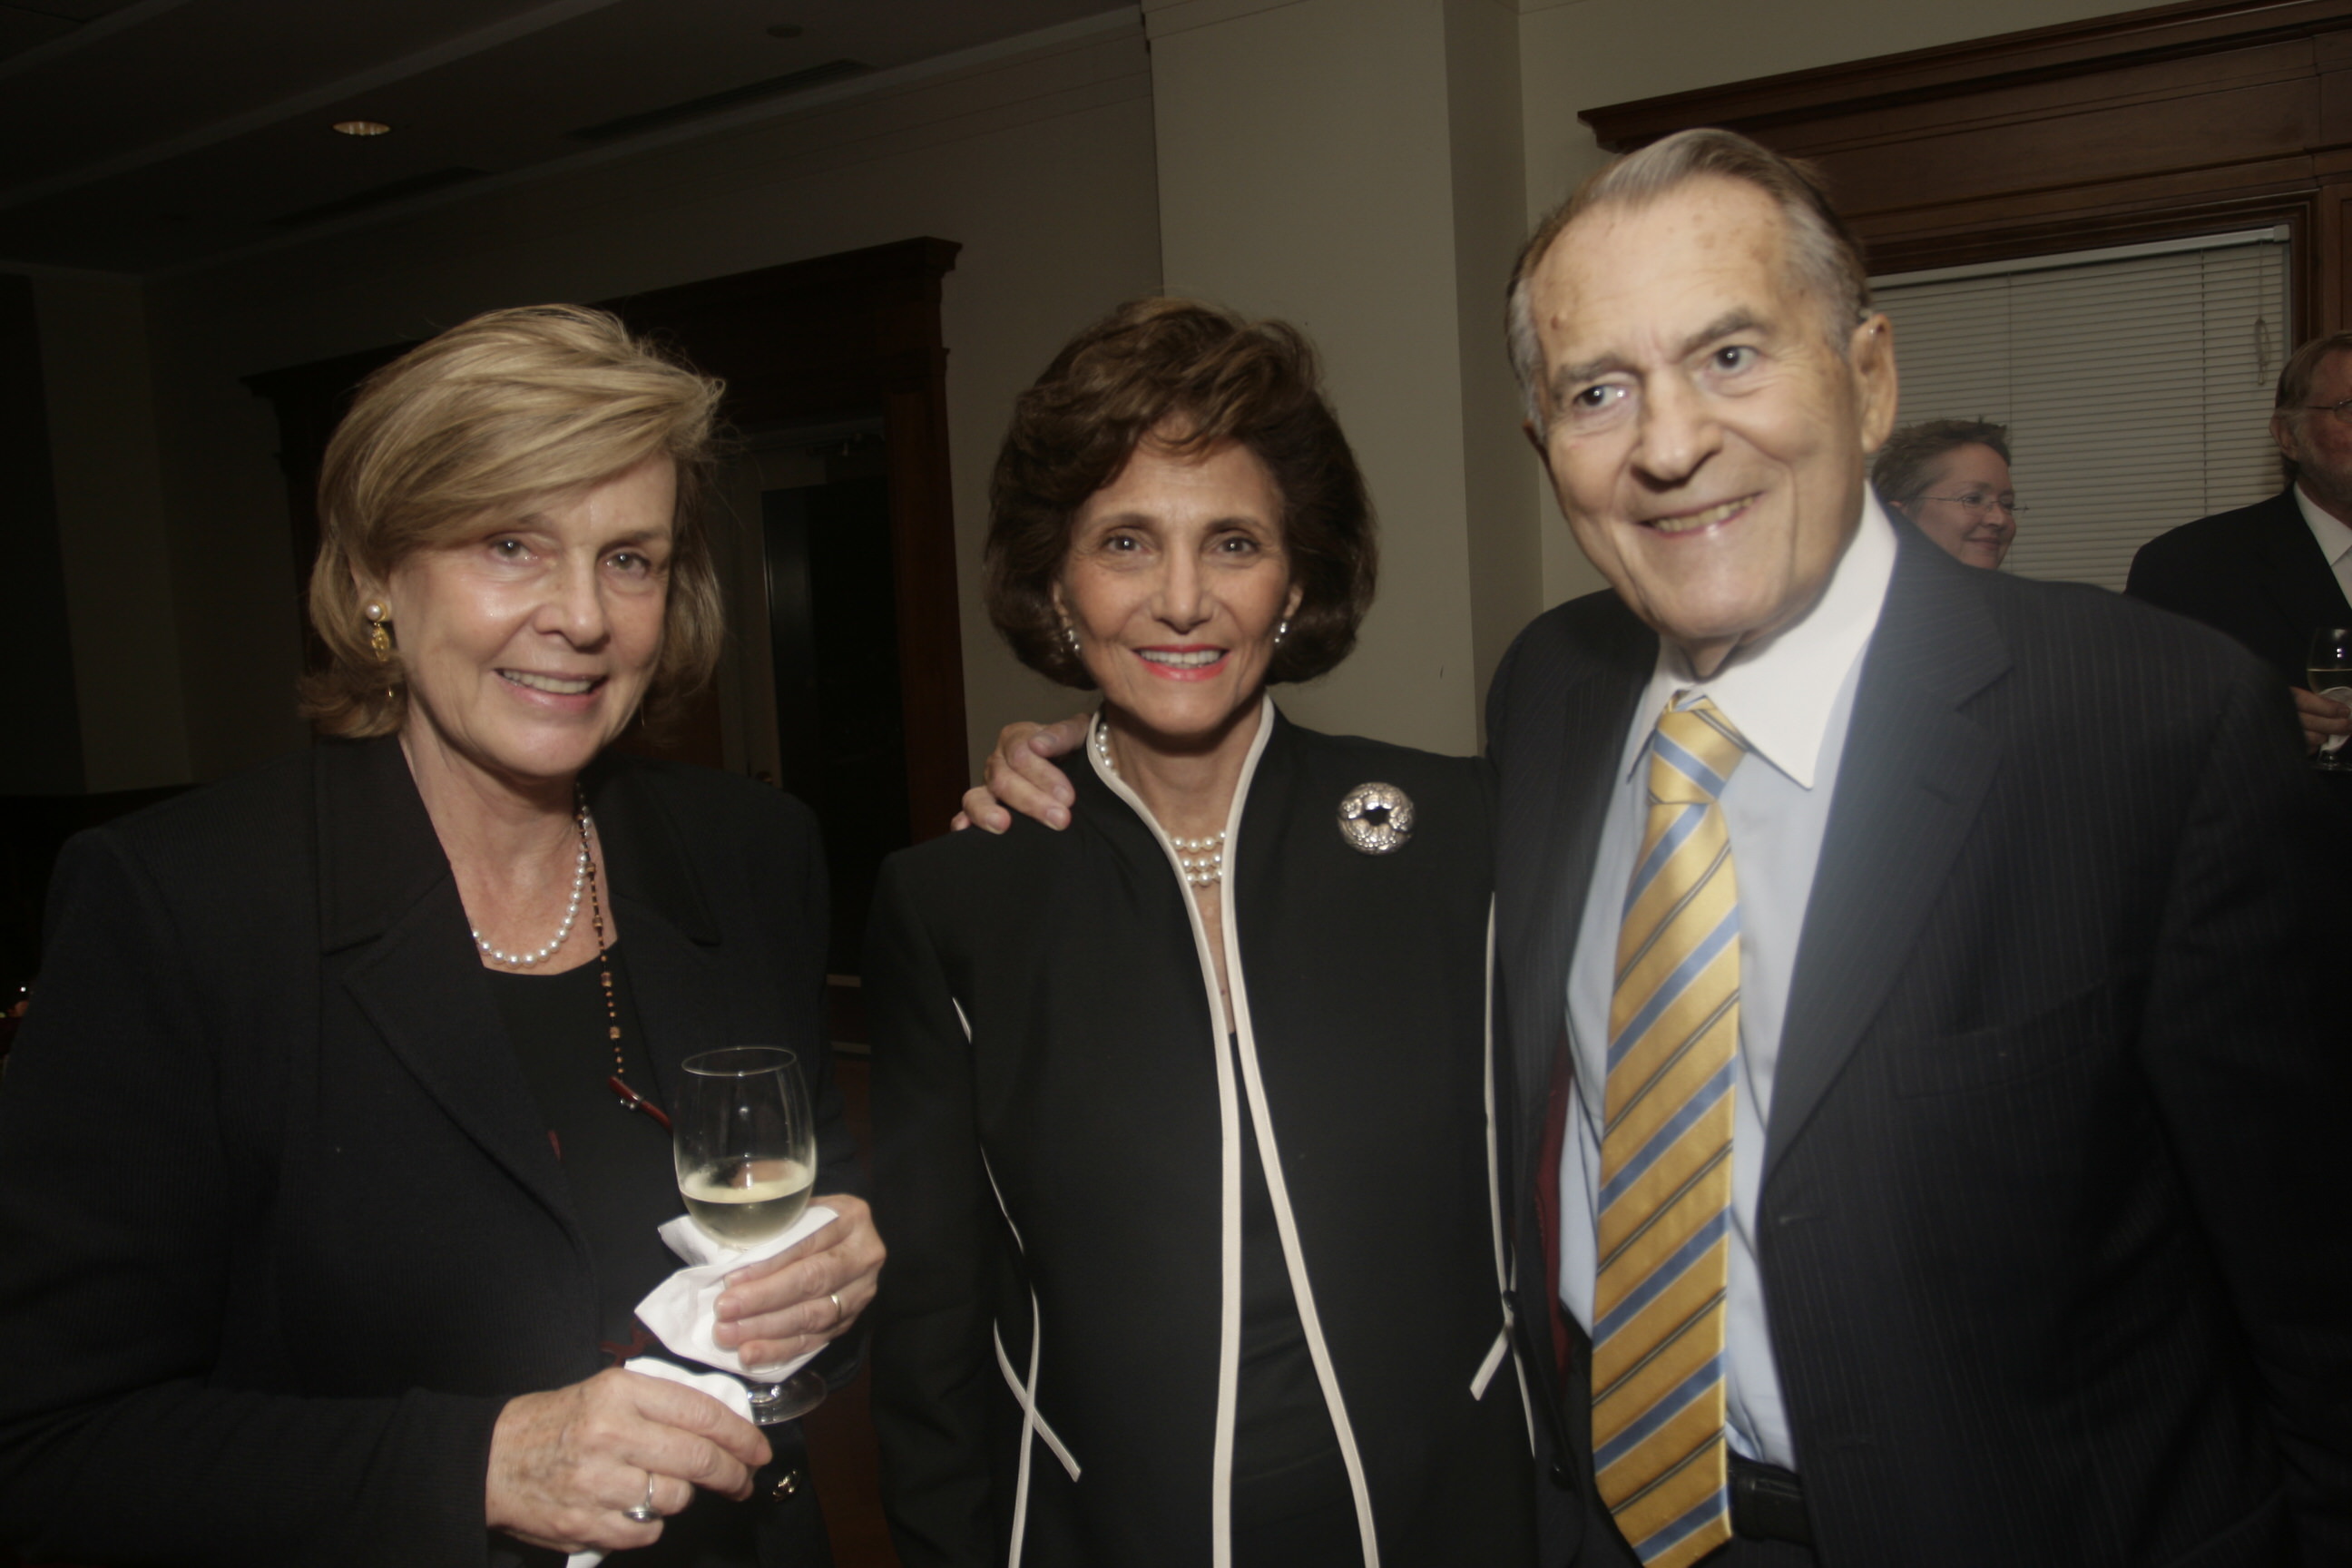 2007 Gruber Justice Prize Photo Gallery | Gruber Foundation